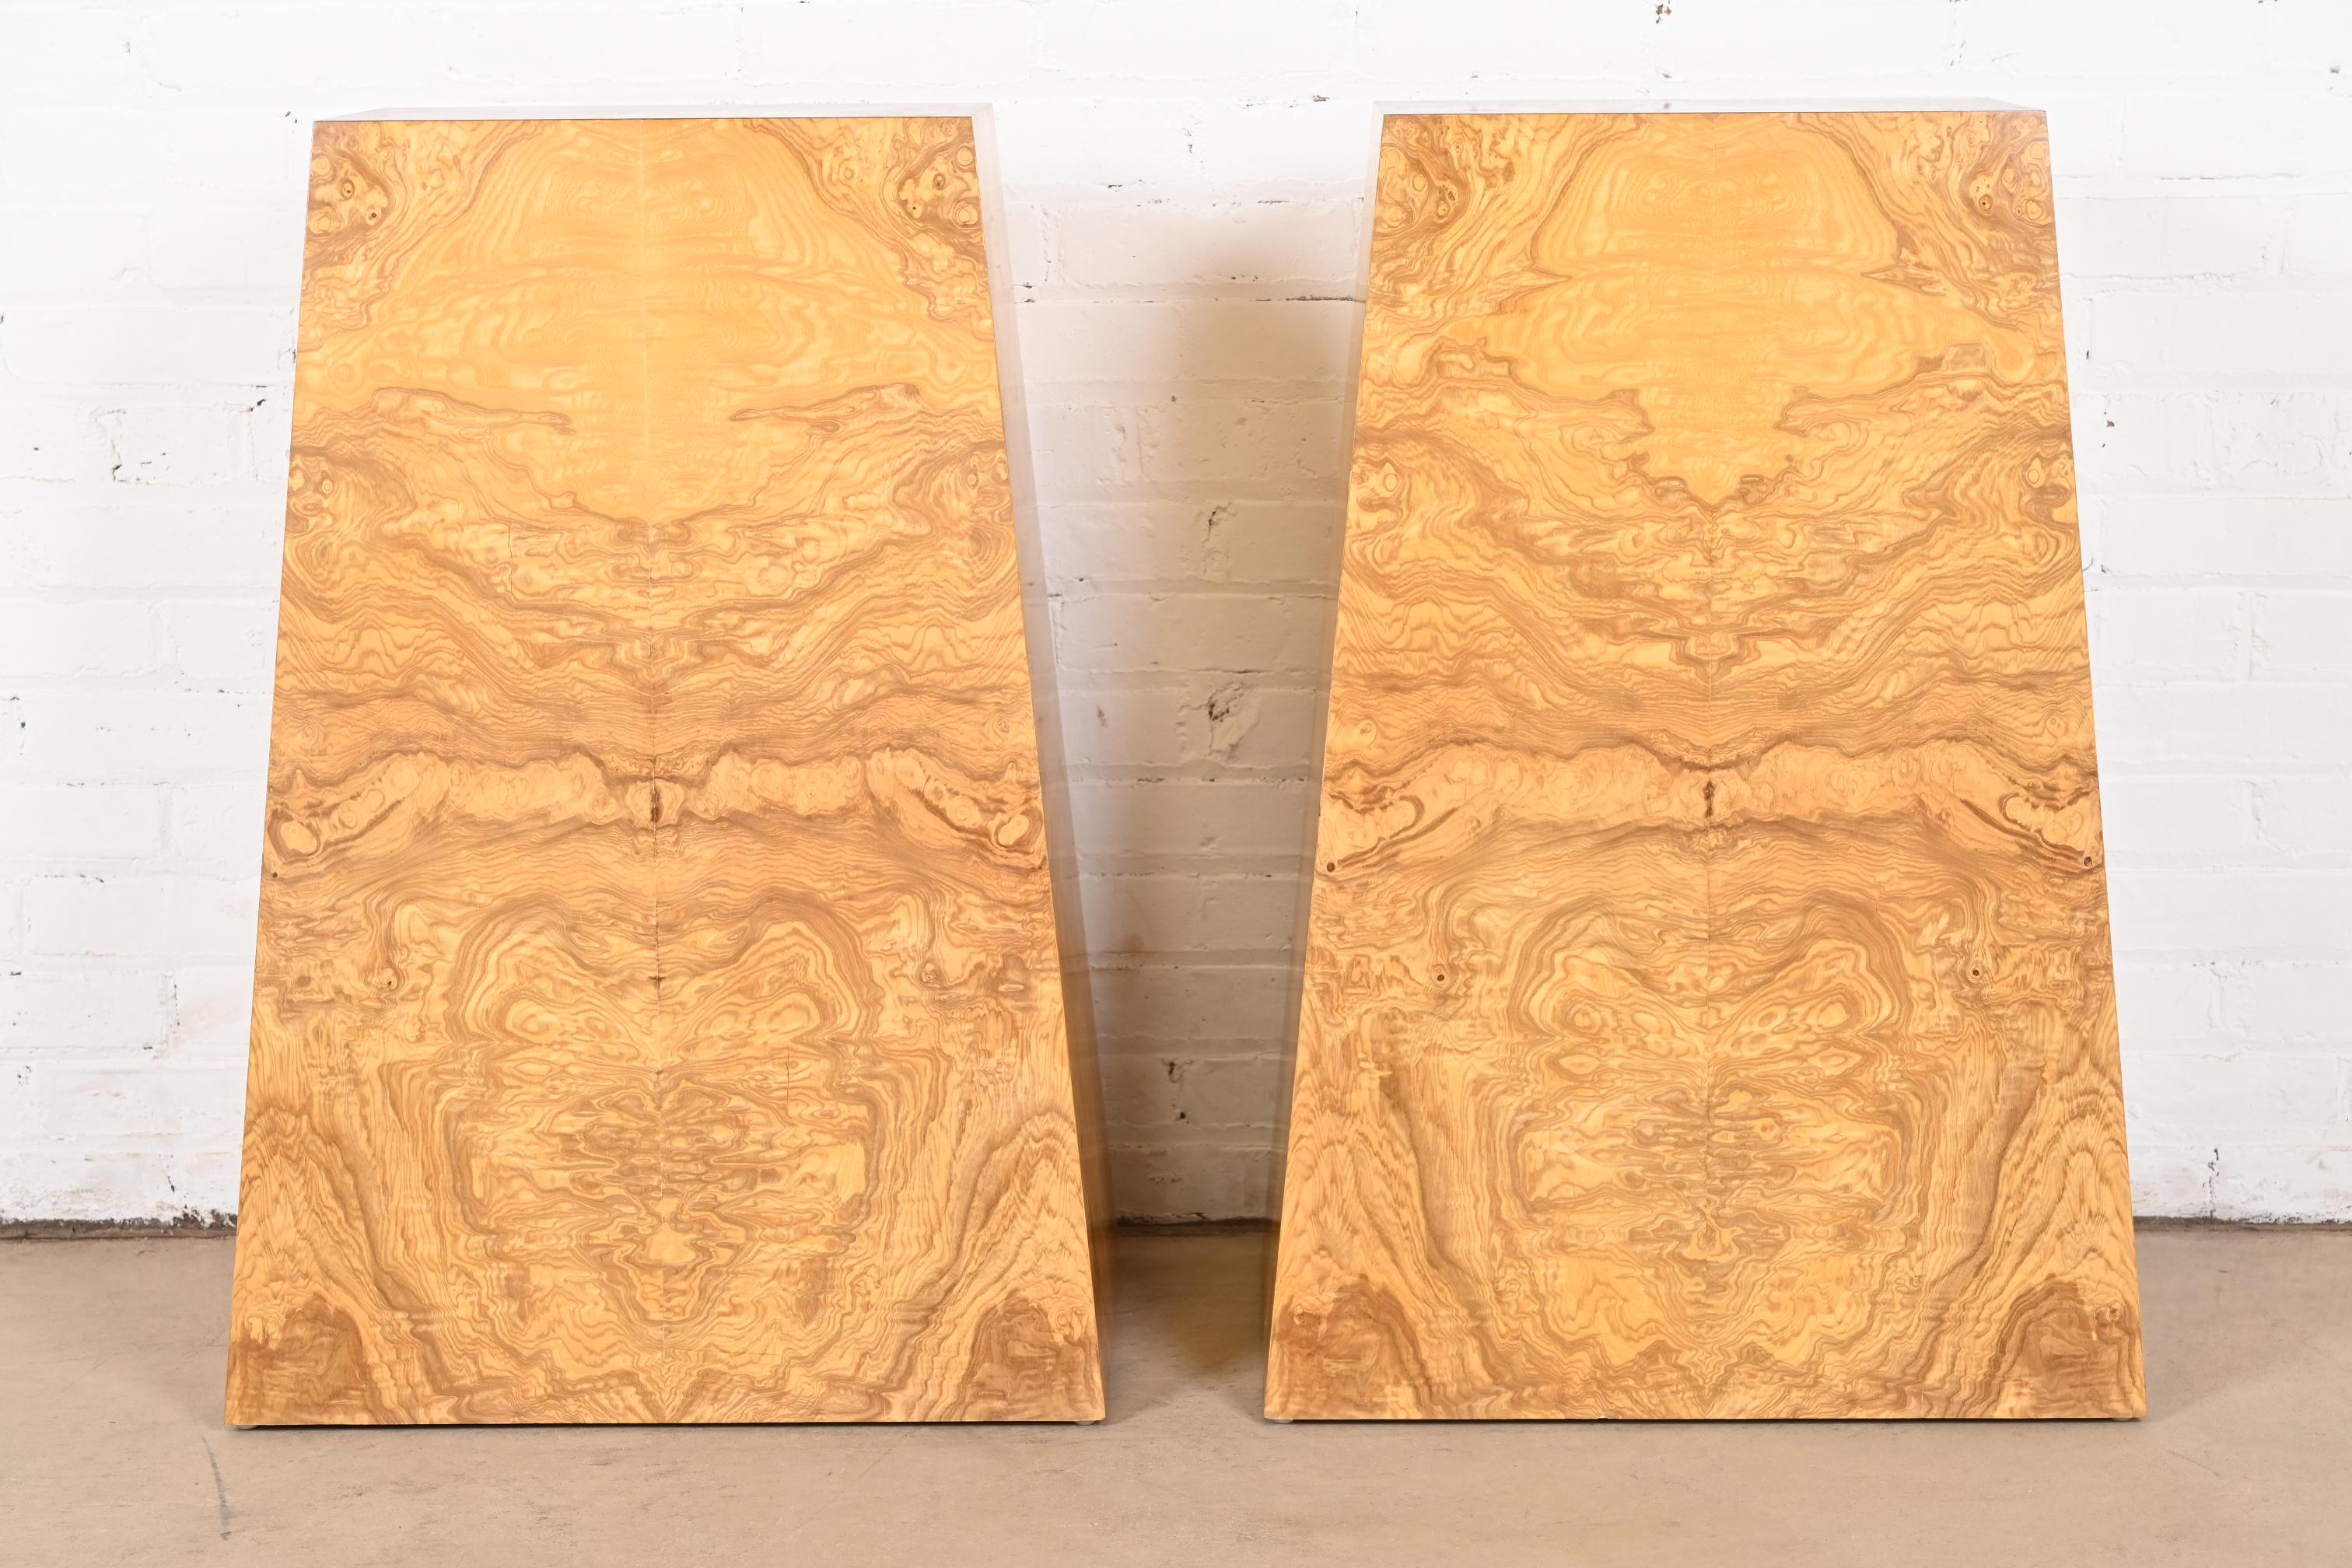 Milo Baughman Style Mid-Century Modern Burl Wood Pedestals, Pair In Good Condition For Sale In South Bend, IN